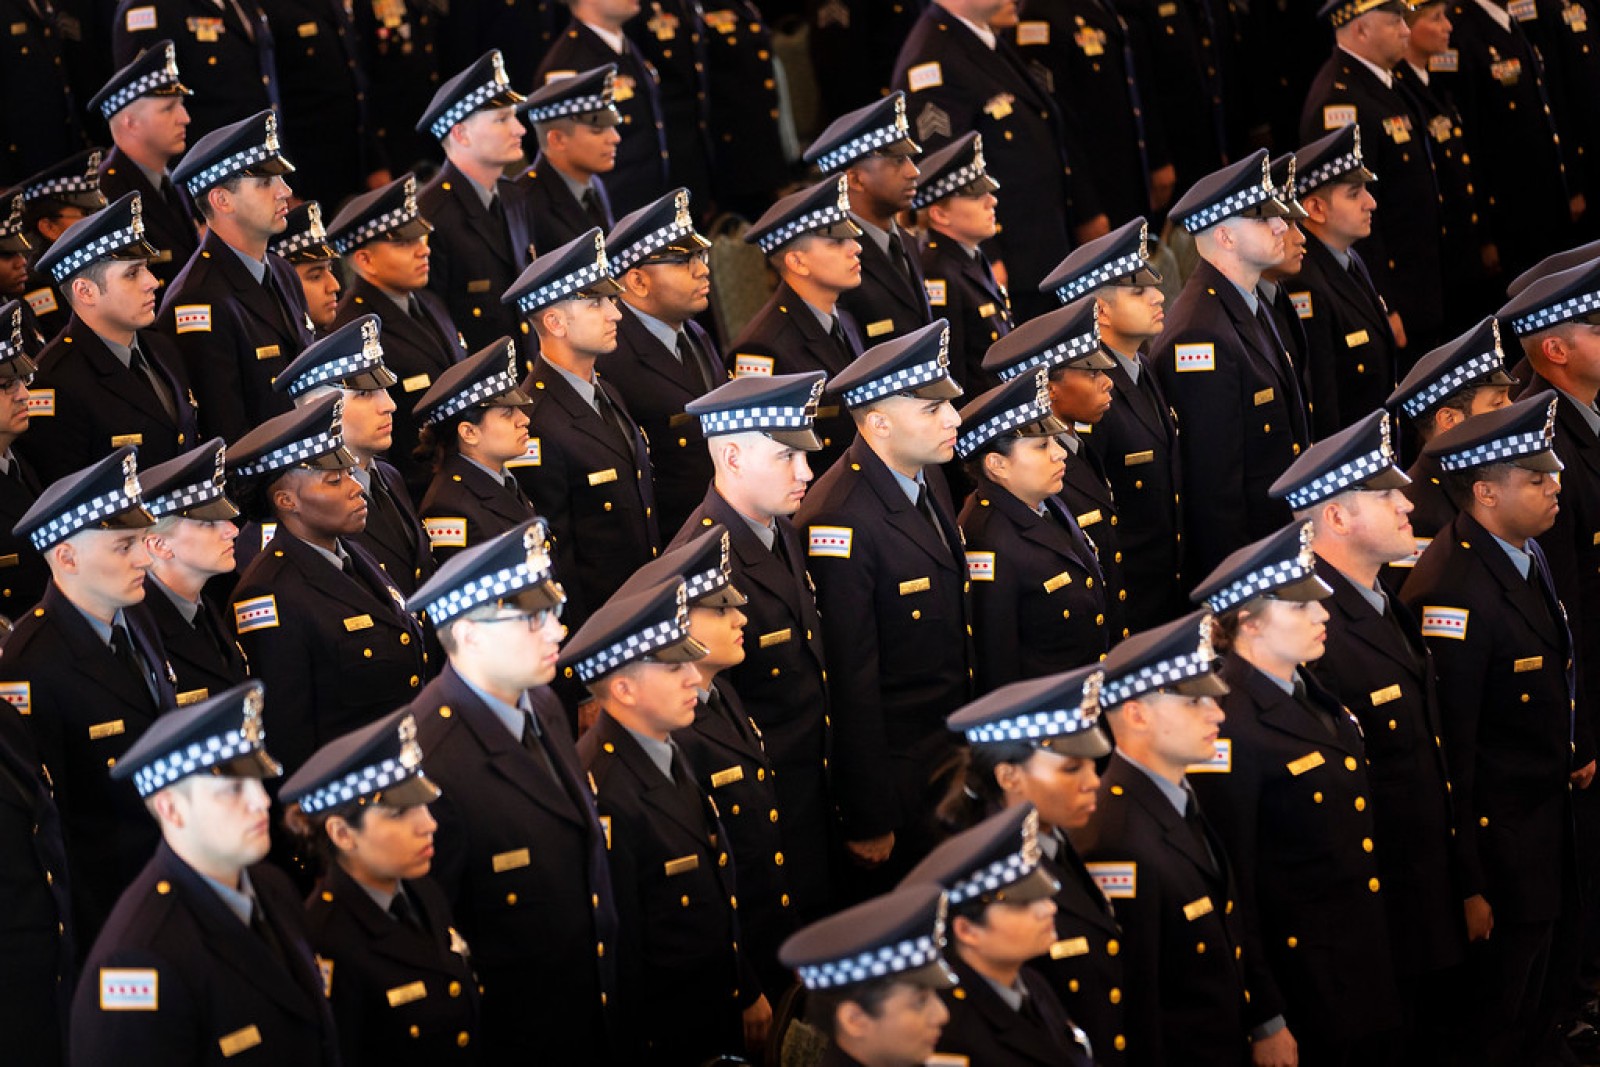 5 Takeaways From Chicago’s Police Budget Hearing WBEZ Chicago